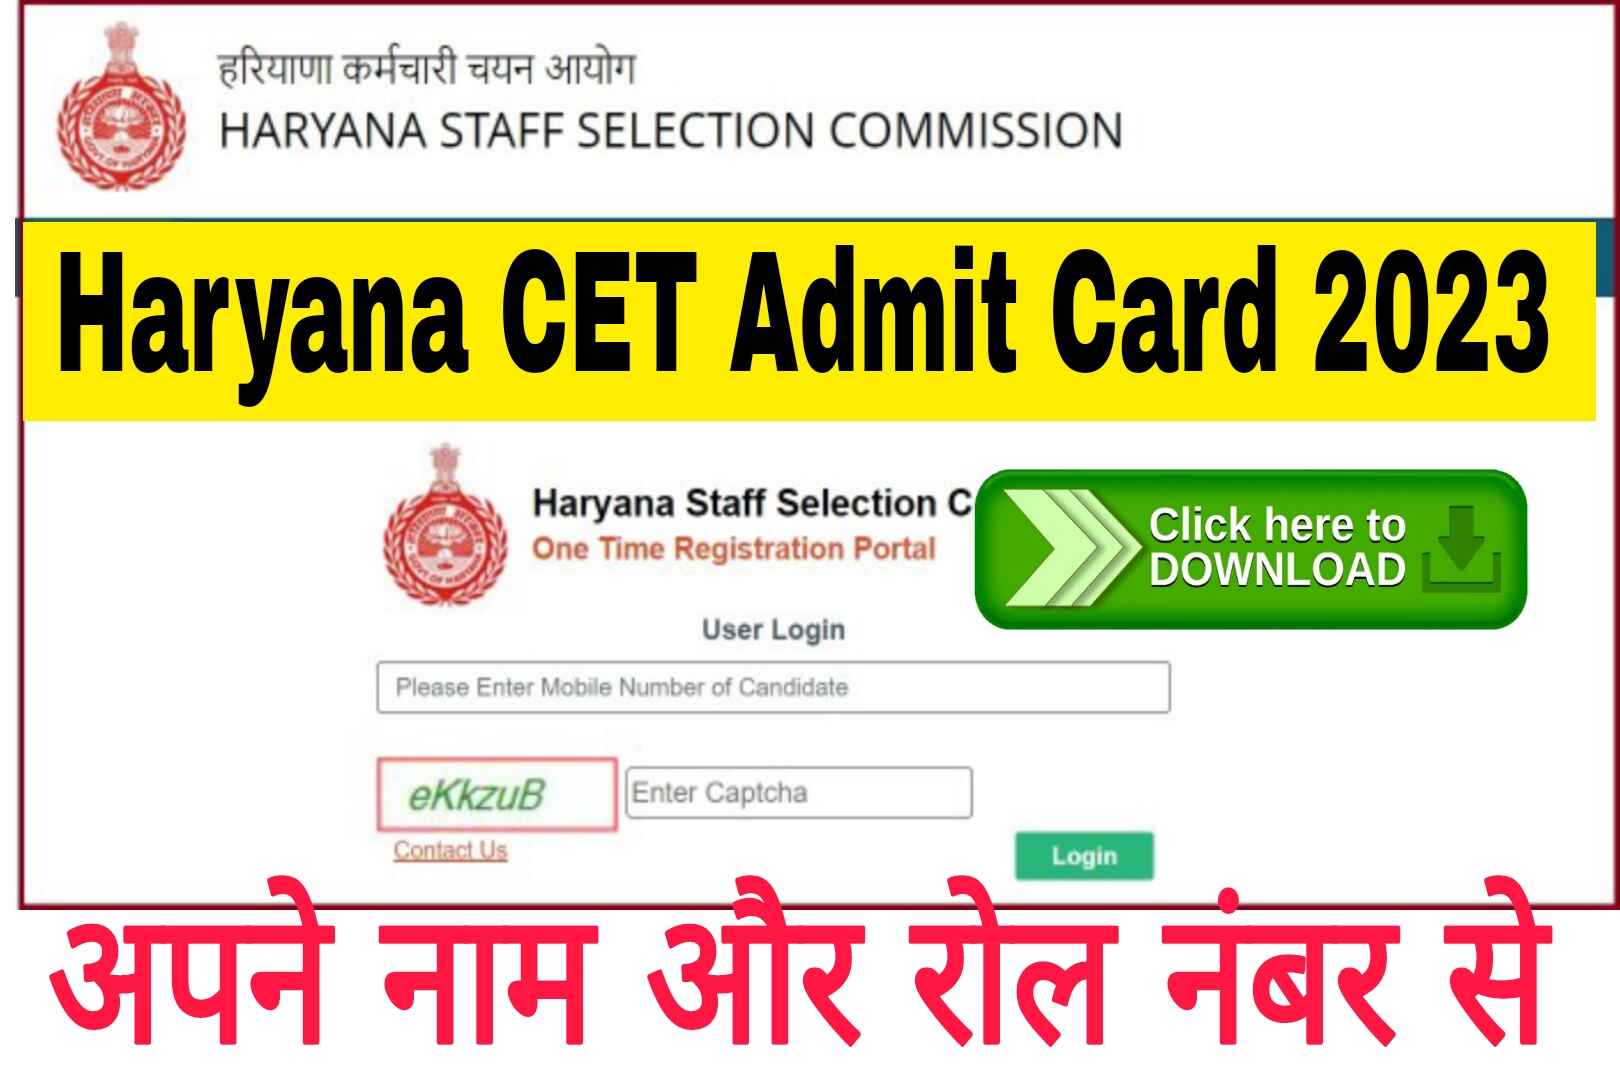 HSSC CET Admit Card 2023 Name Wise